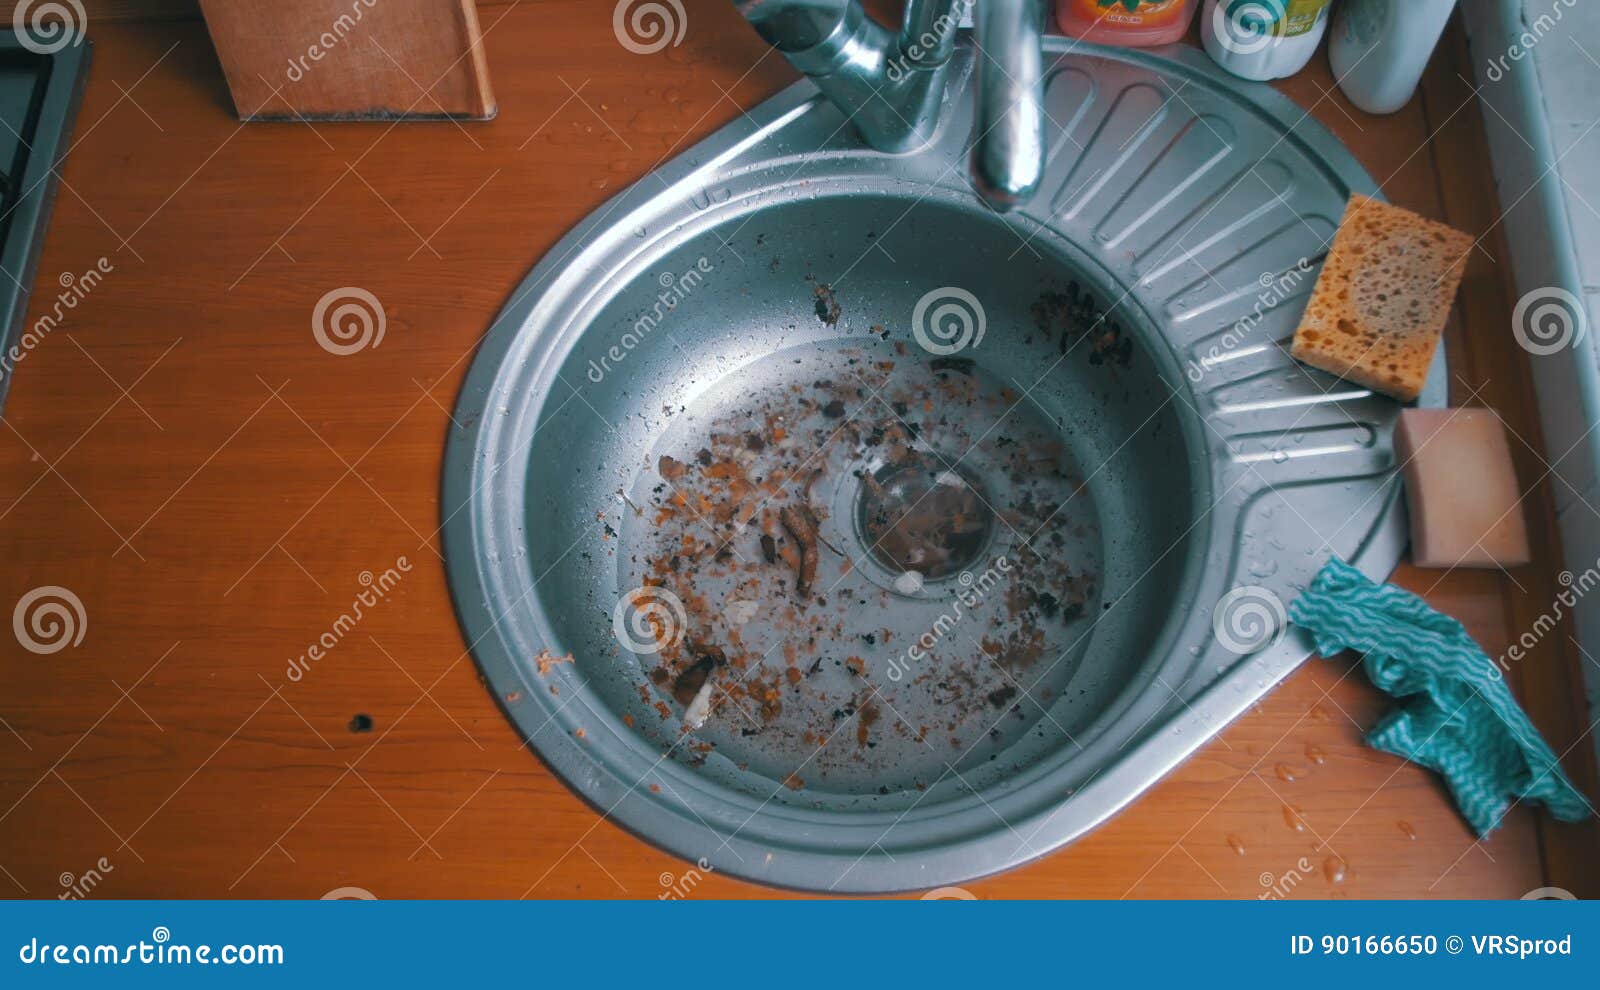 Kitchen Drain Clogging Up With Food Particles Stock Footage